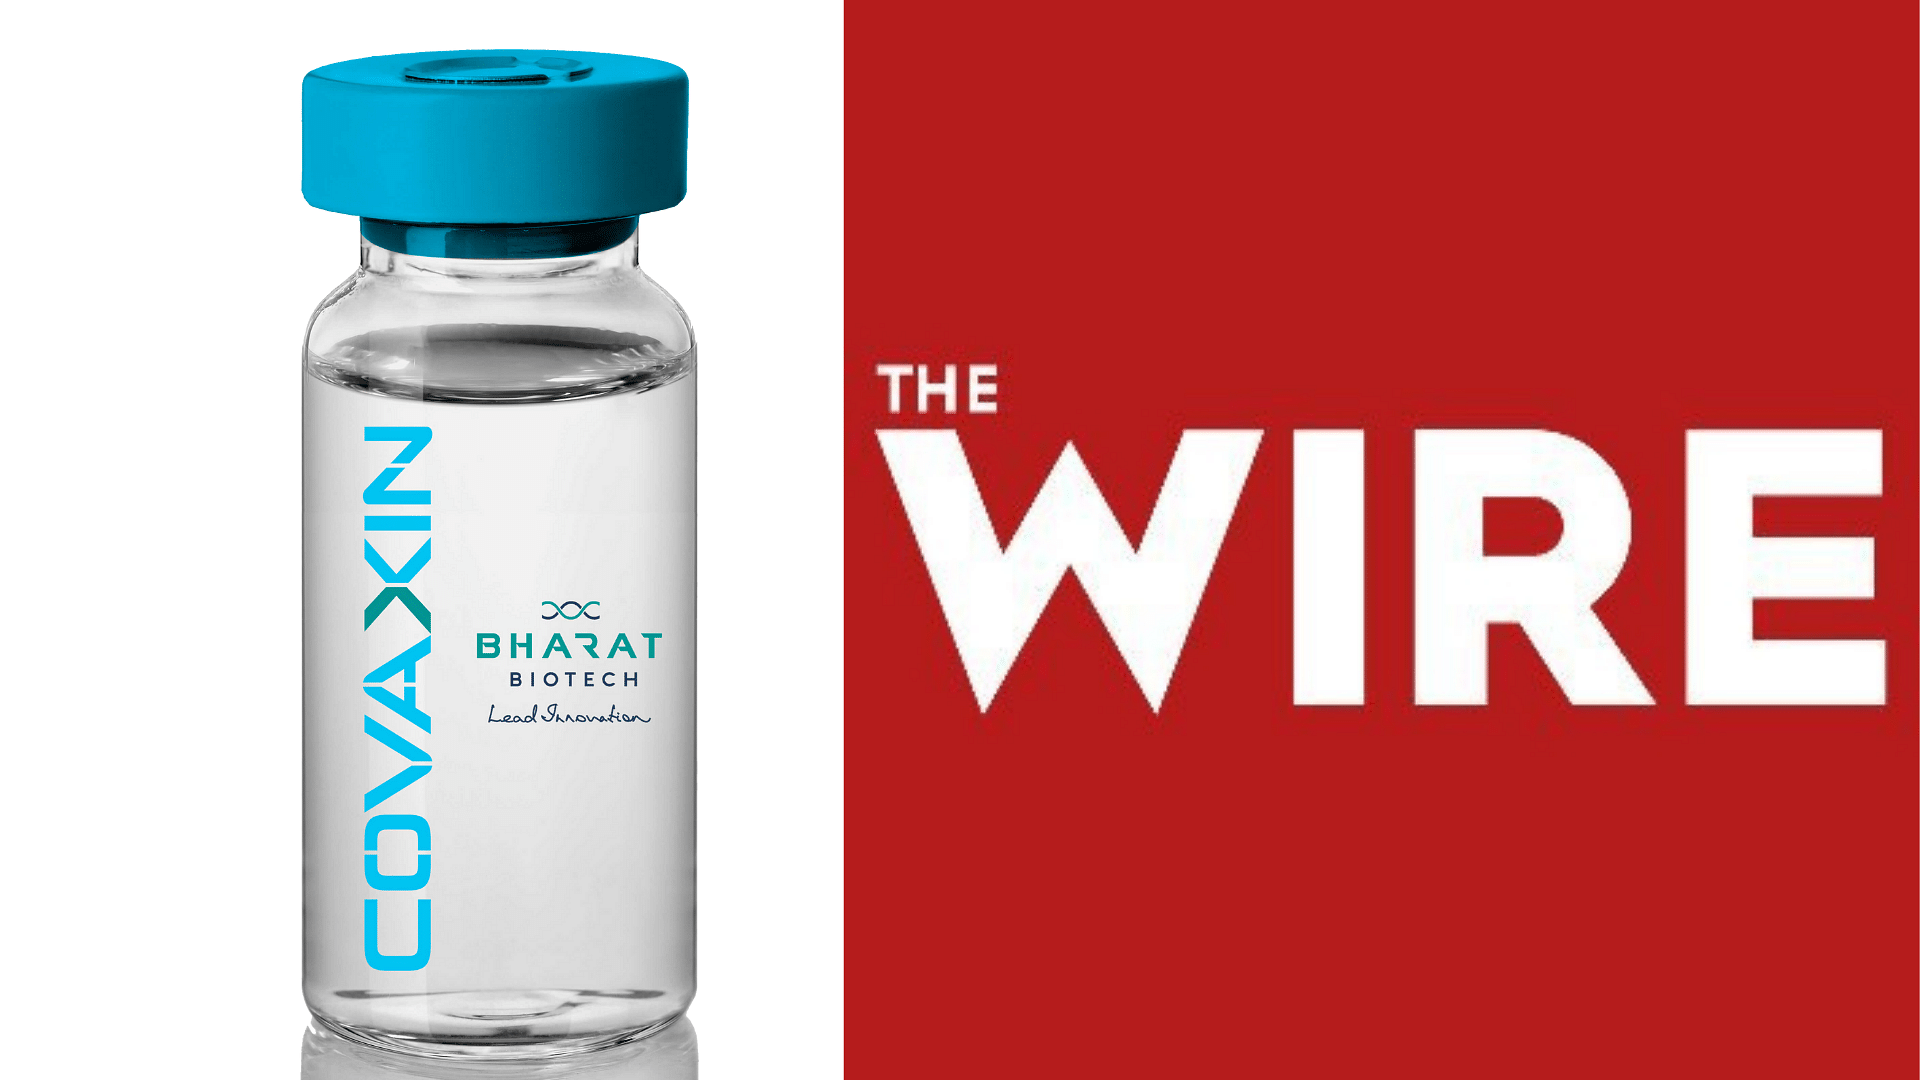 <div class="paragraphs"><p>In a Rs 100 crore defamation case filed by Indian drugmaker Bharat Biotech, the Andhra Pradesh High Court on Wednesday, 22 February, ordered taking down of 14 articles from <em>The Wire</em>.</p></div>